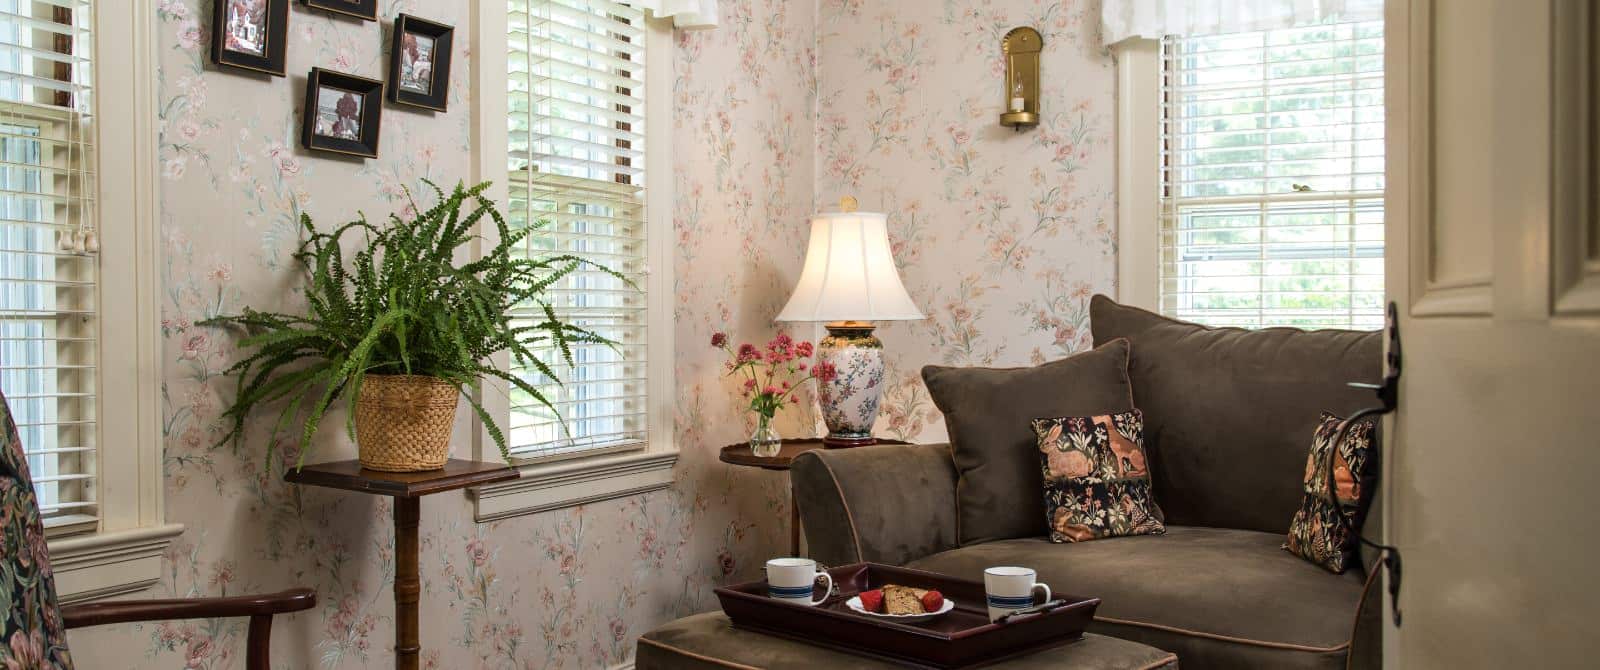 Bedroom sitting area with floral wallpaper, dark brown upholstered oversized chair and ottoman, and multiple windows